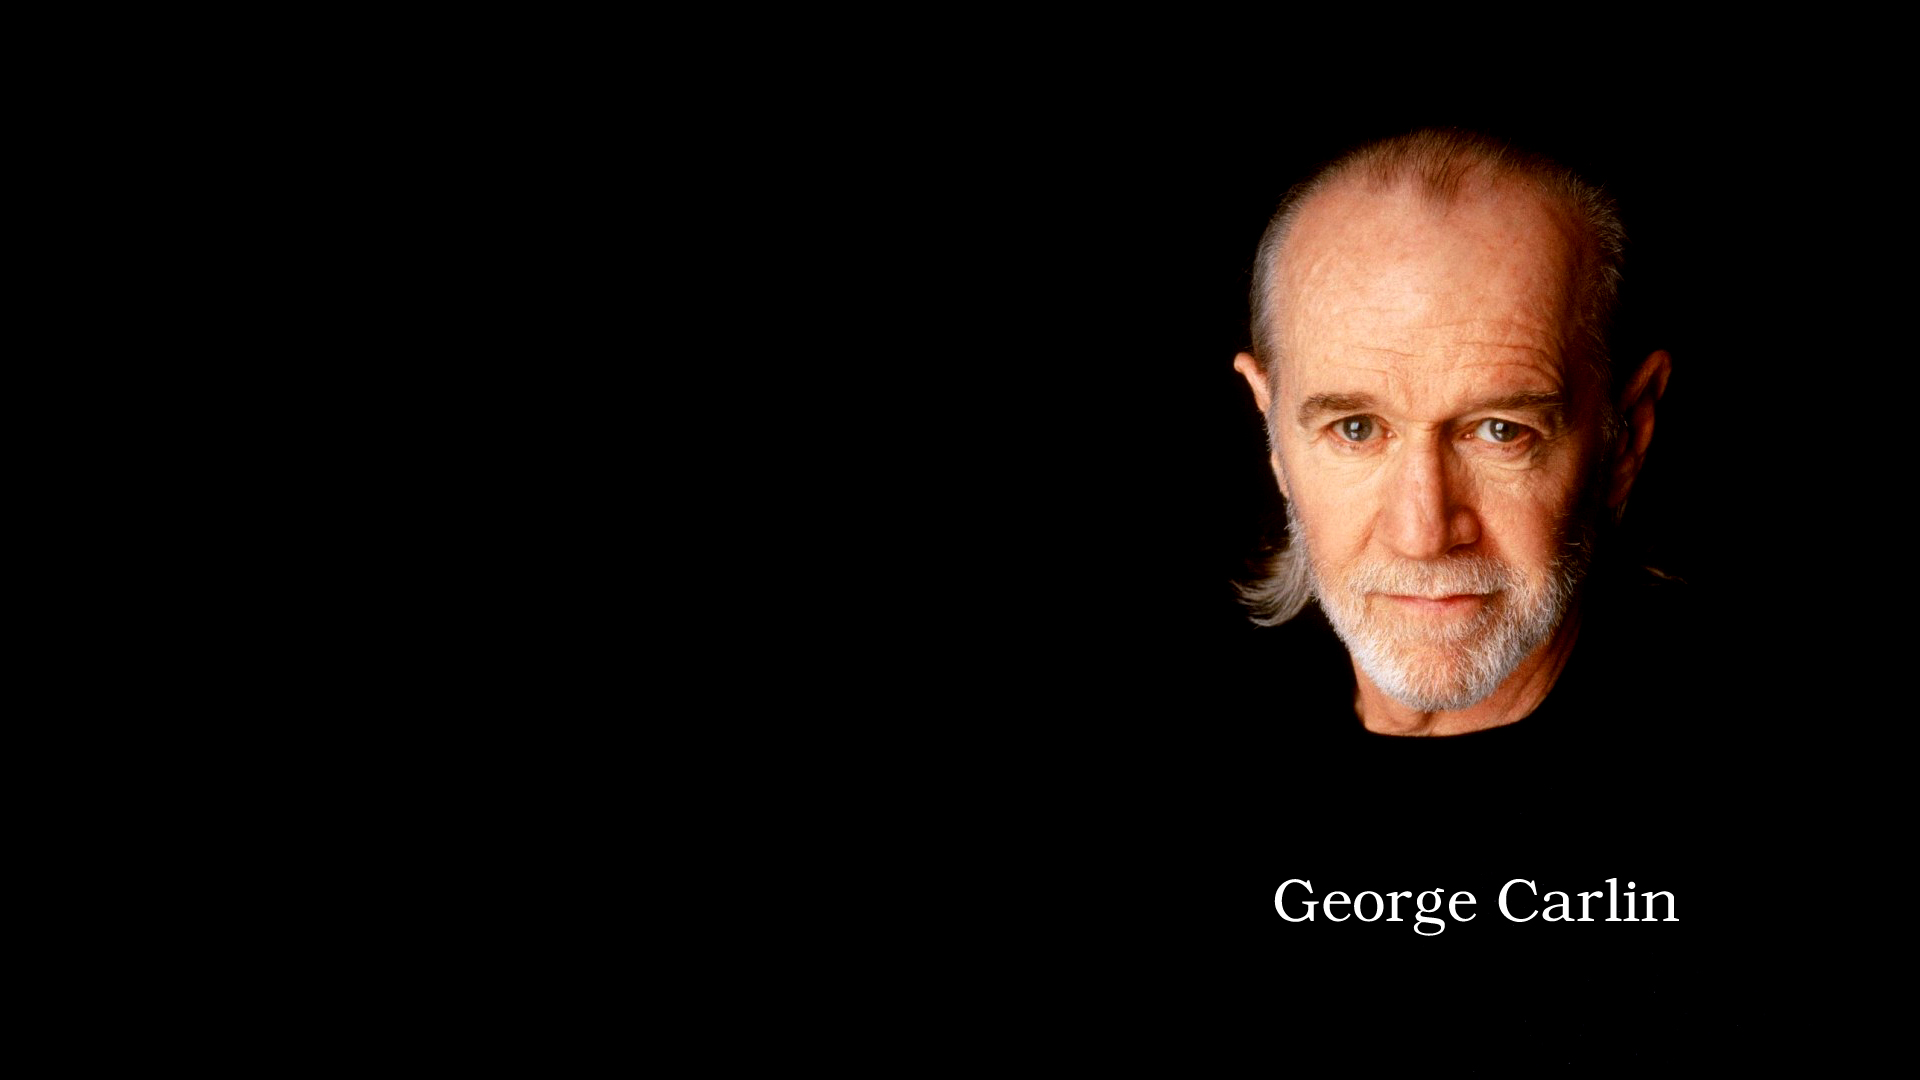 13 Quality George Carlin Wallpapers, Celebrity